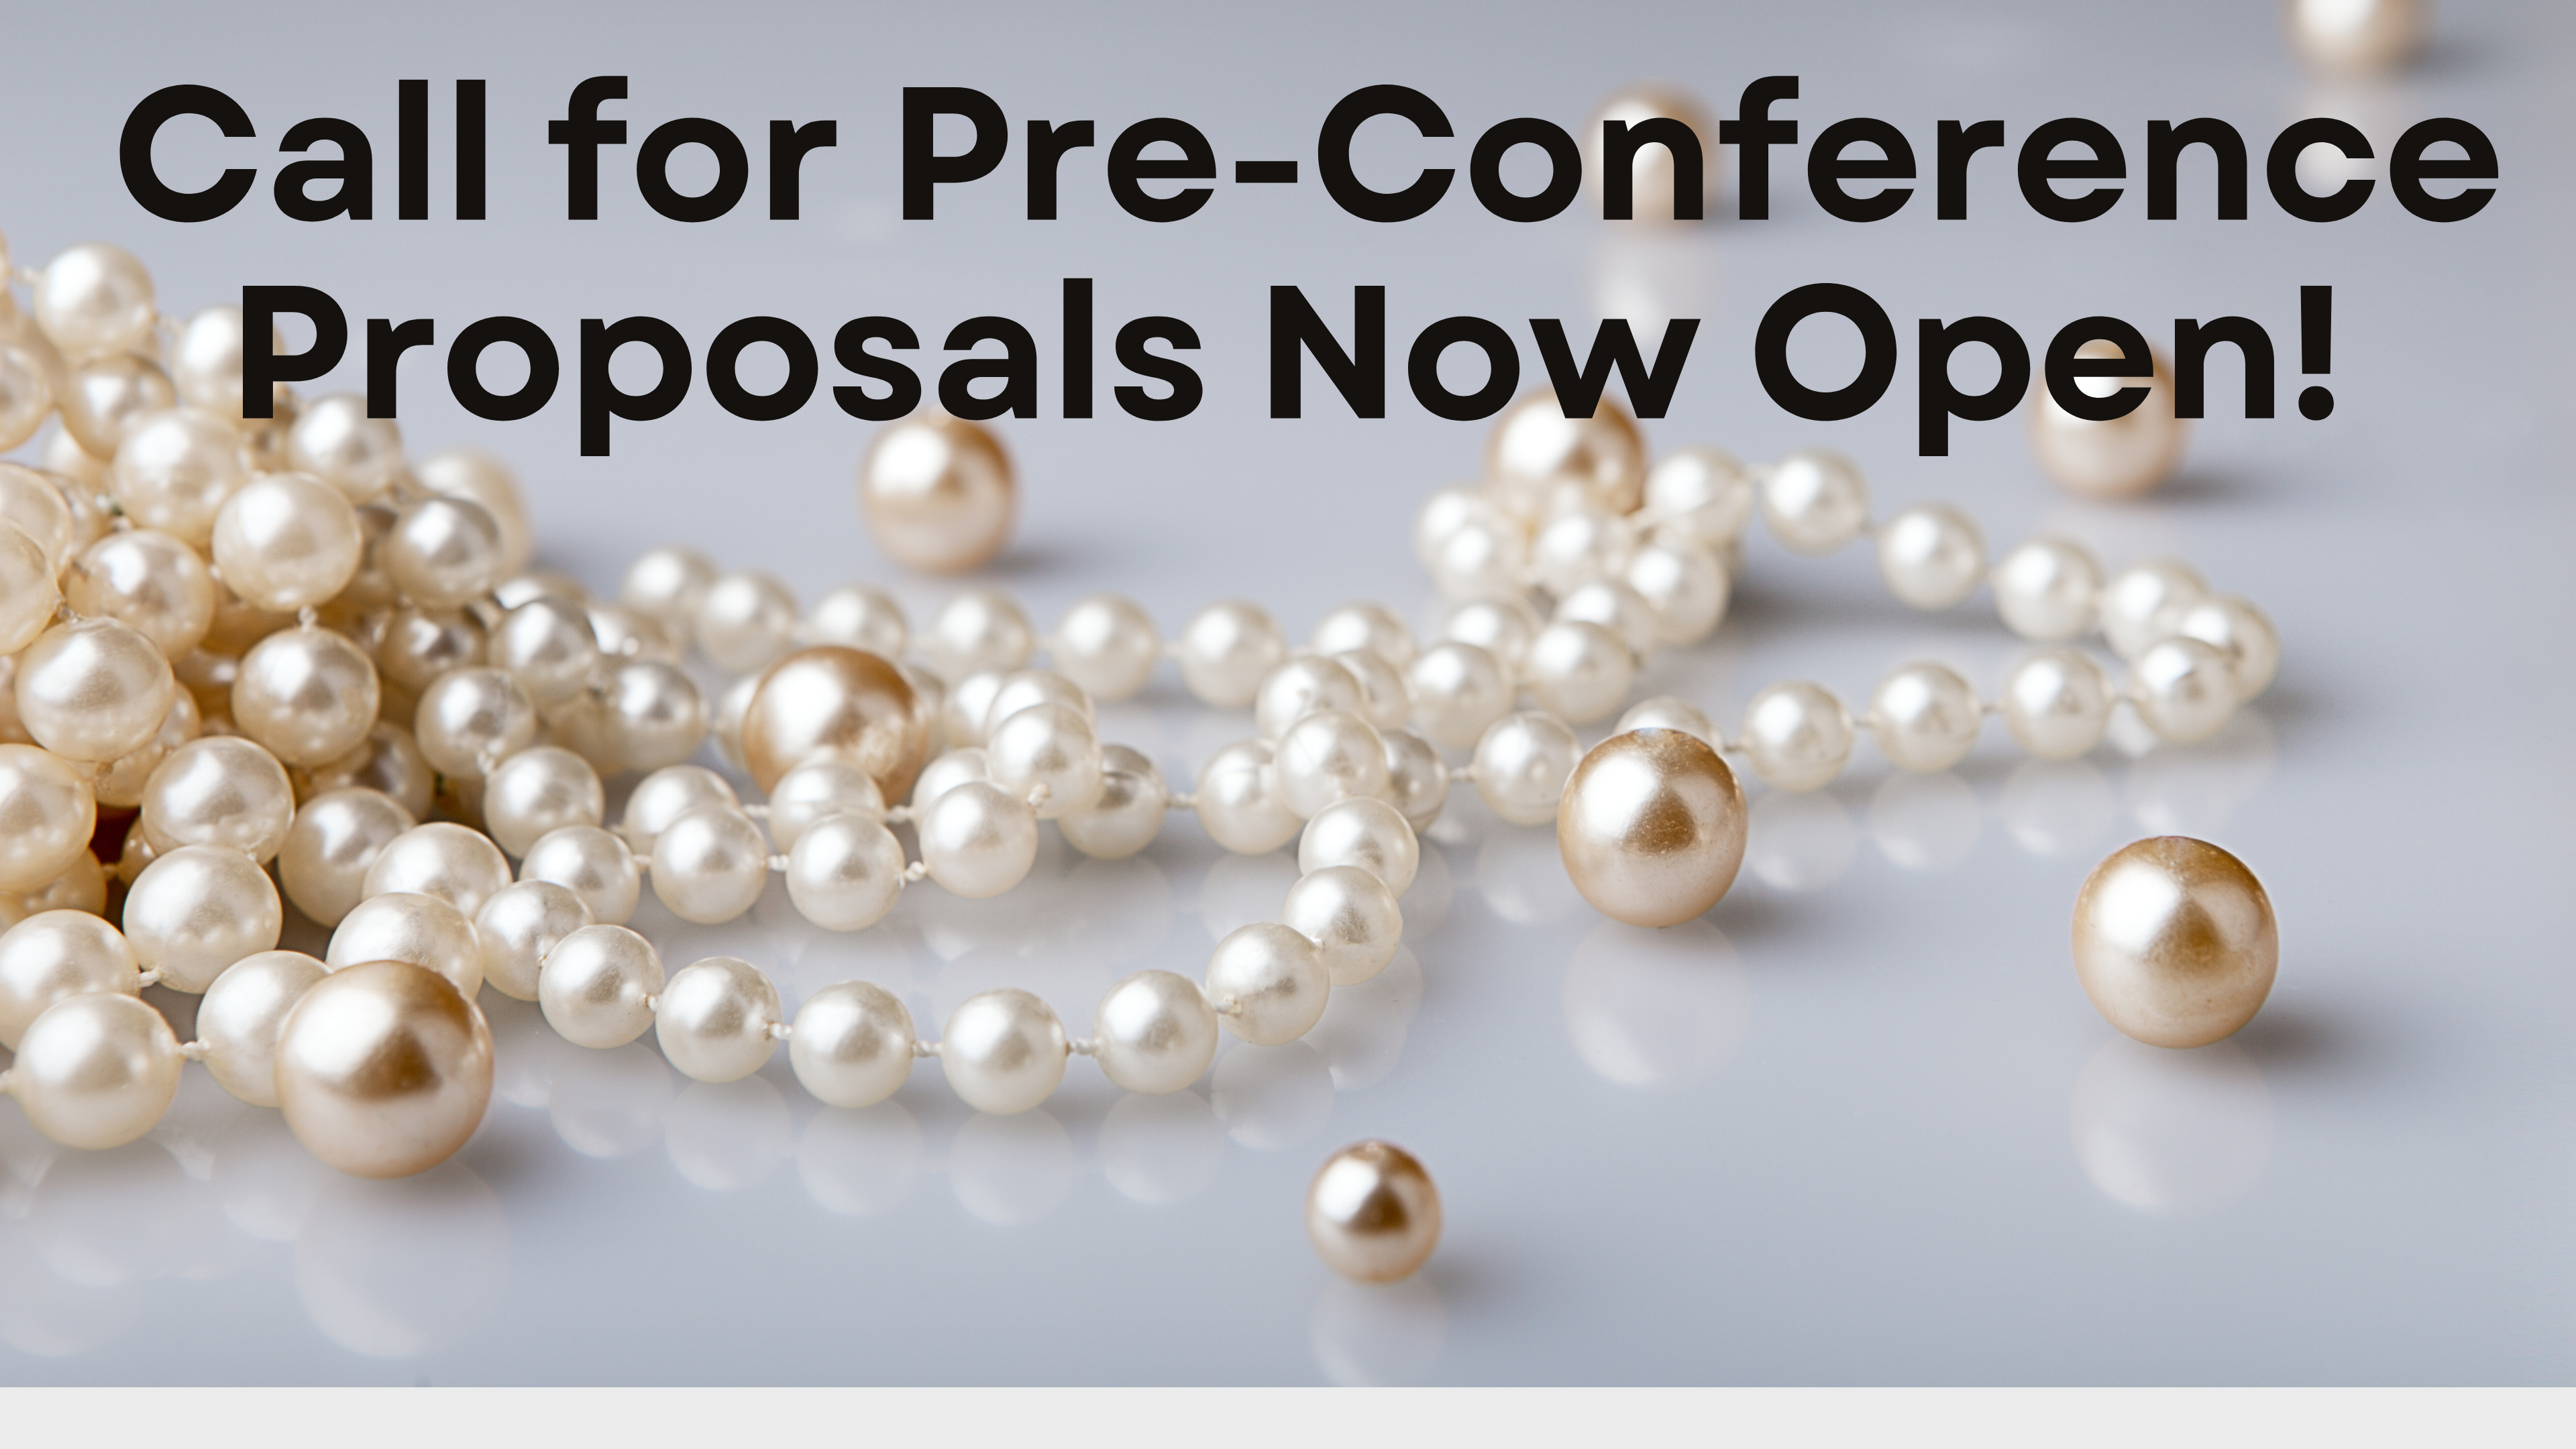 Call for Pre-Conference Proposals Now Open!